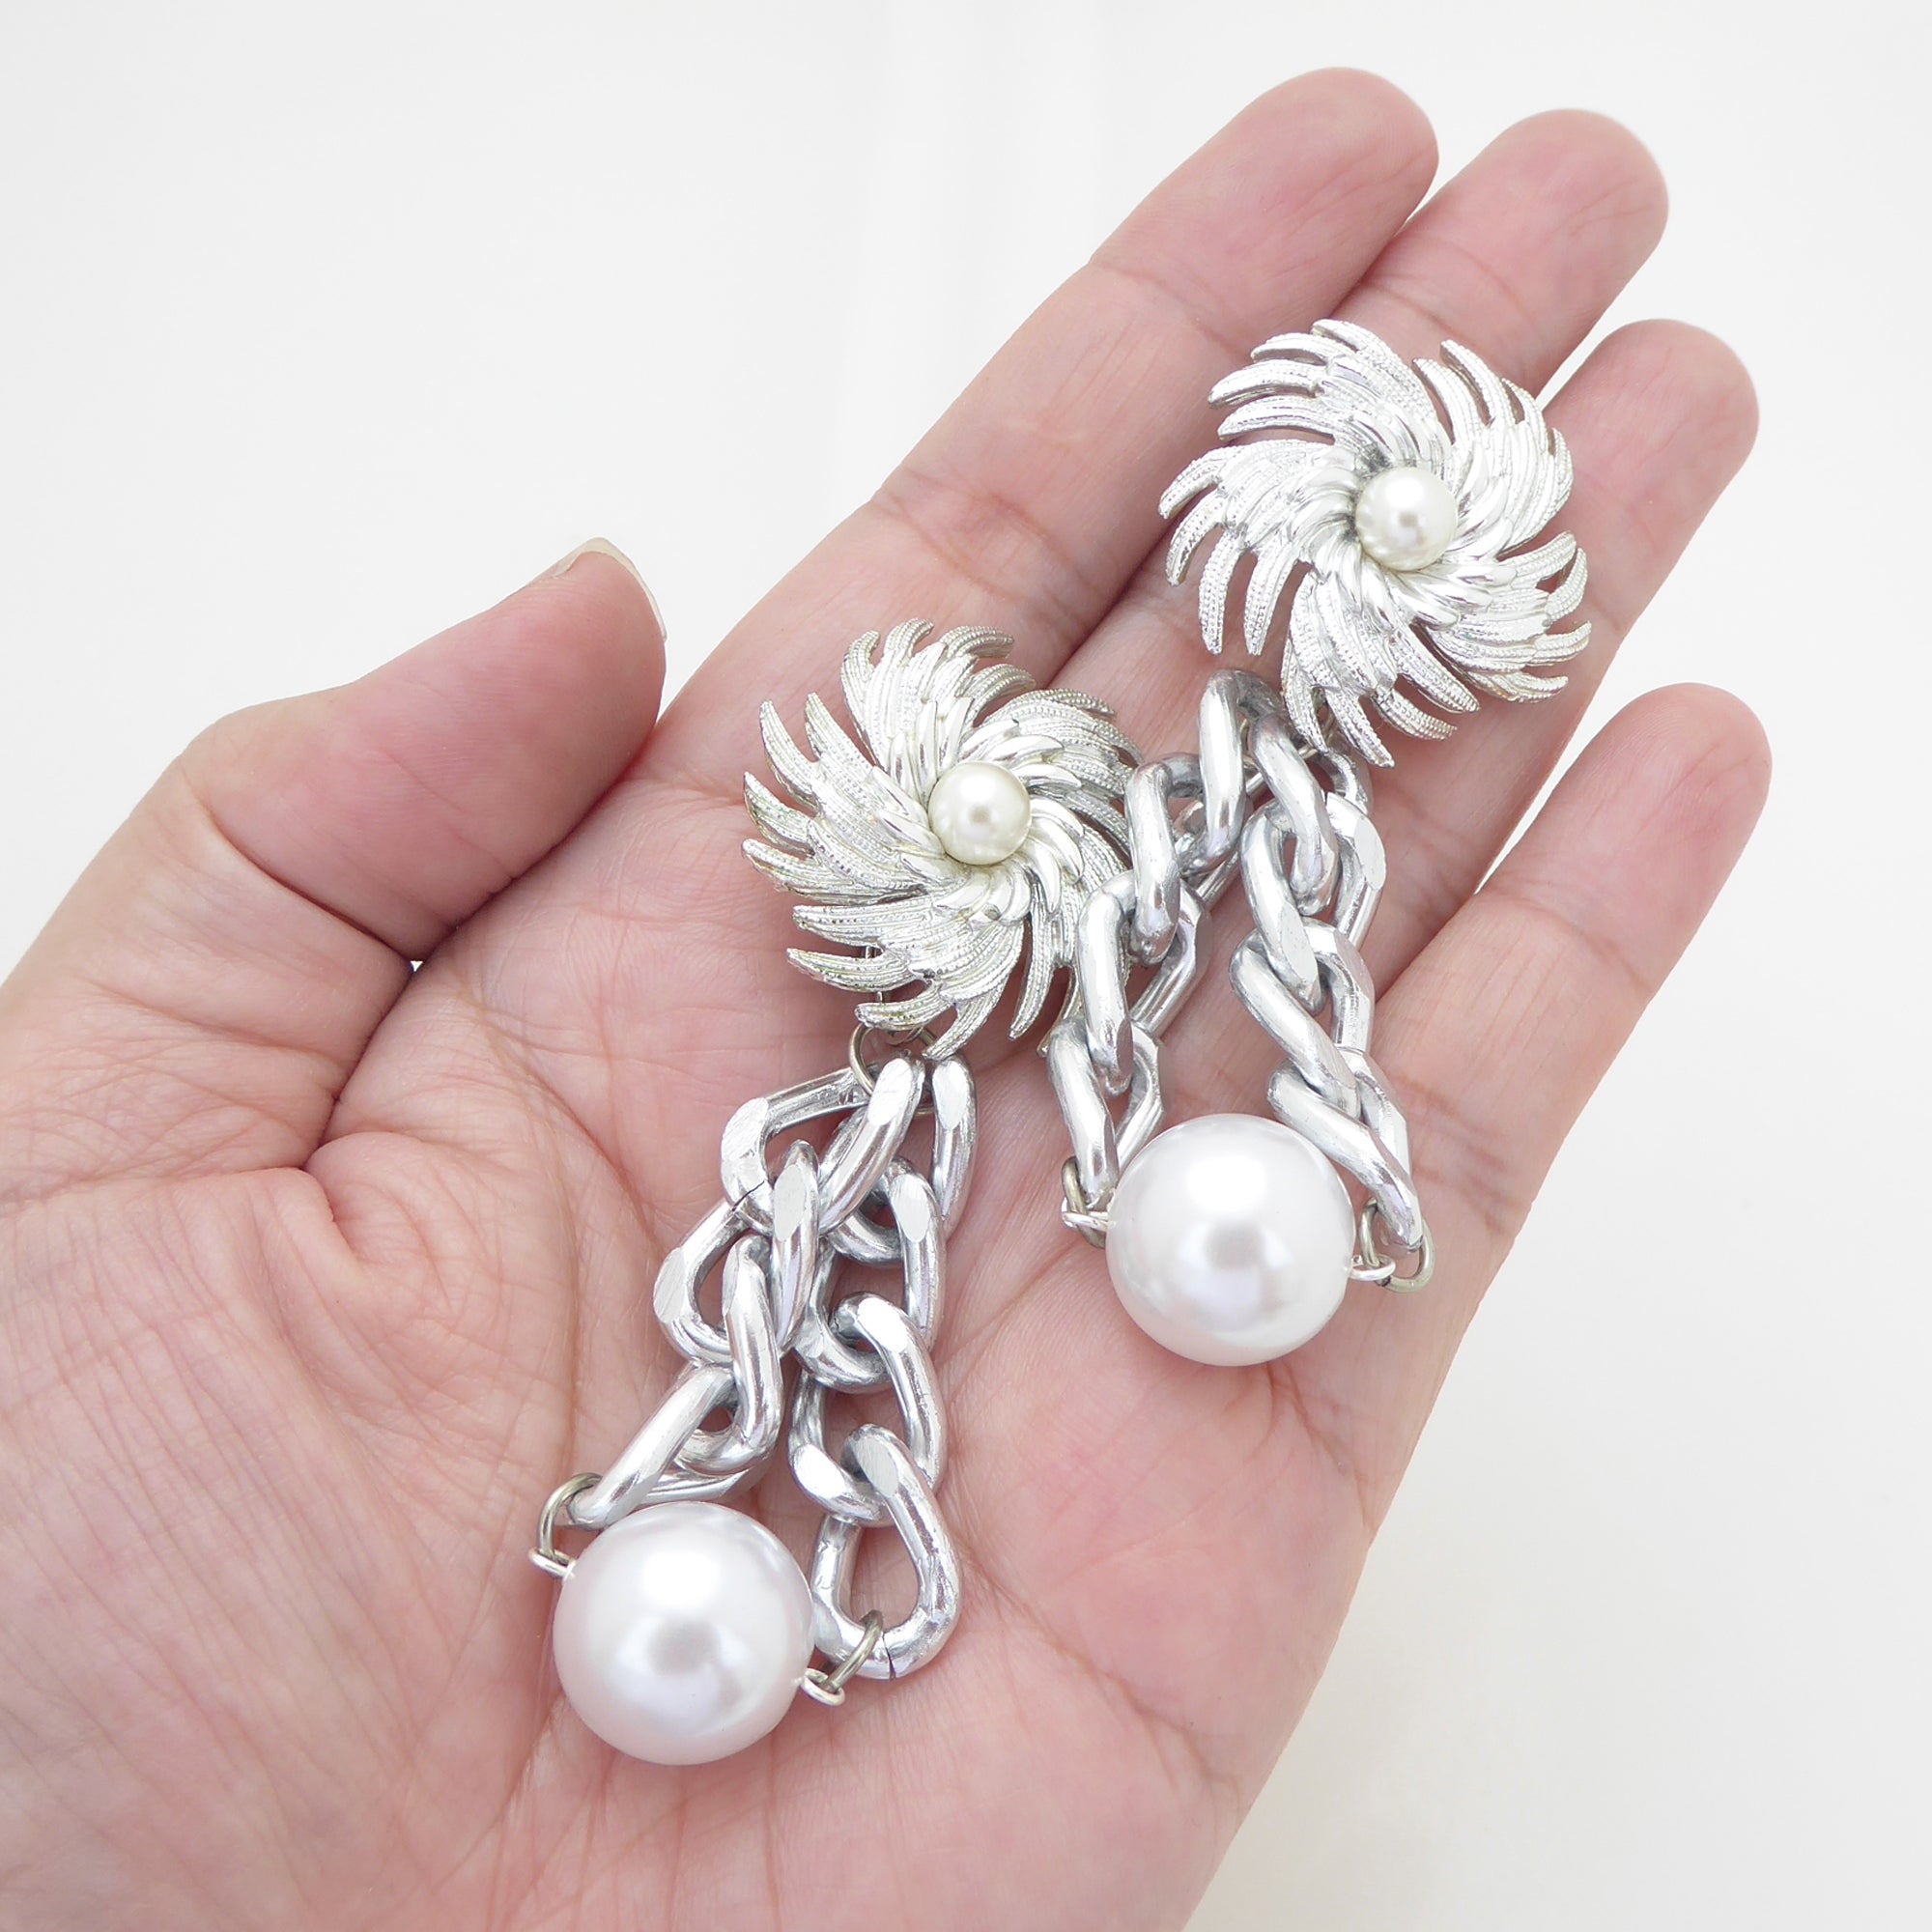 Vintage silver dahlia pearl and chain earrings by Jenny Dayco 6